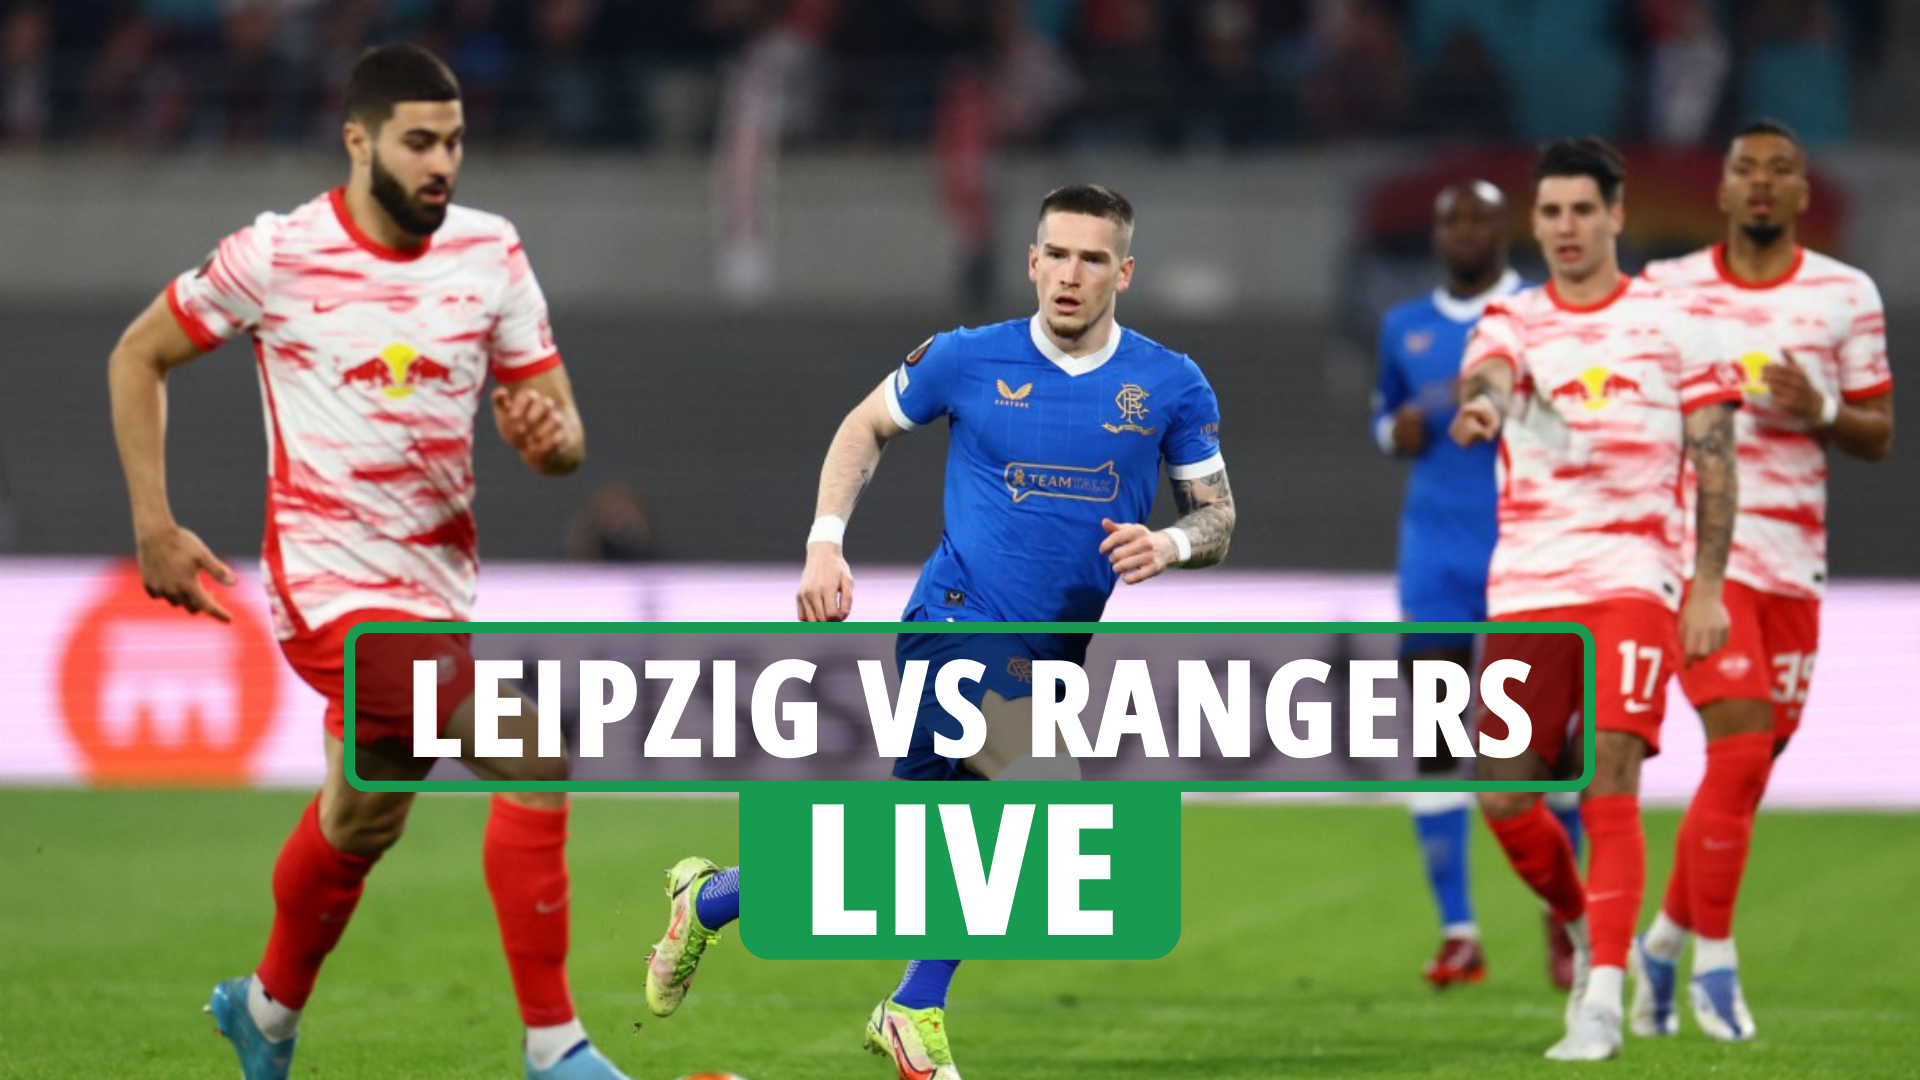 RB Leipzig vs Rangers: TV channel, live stream, kick-off time and team news